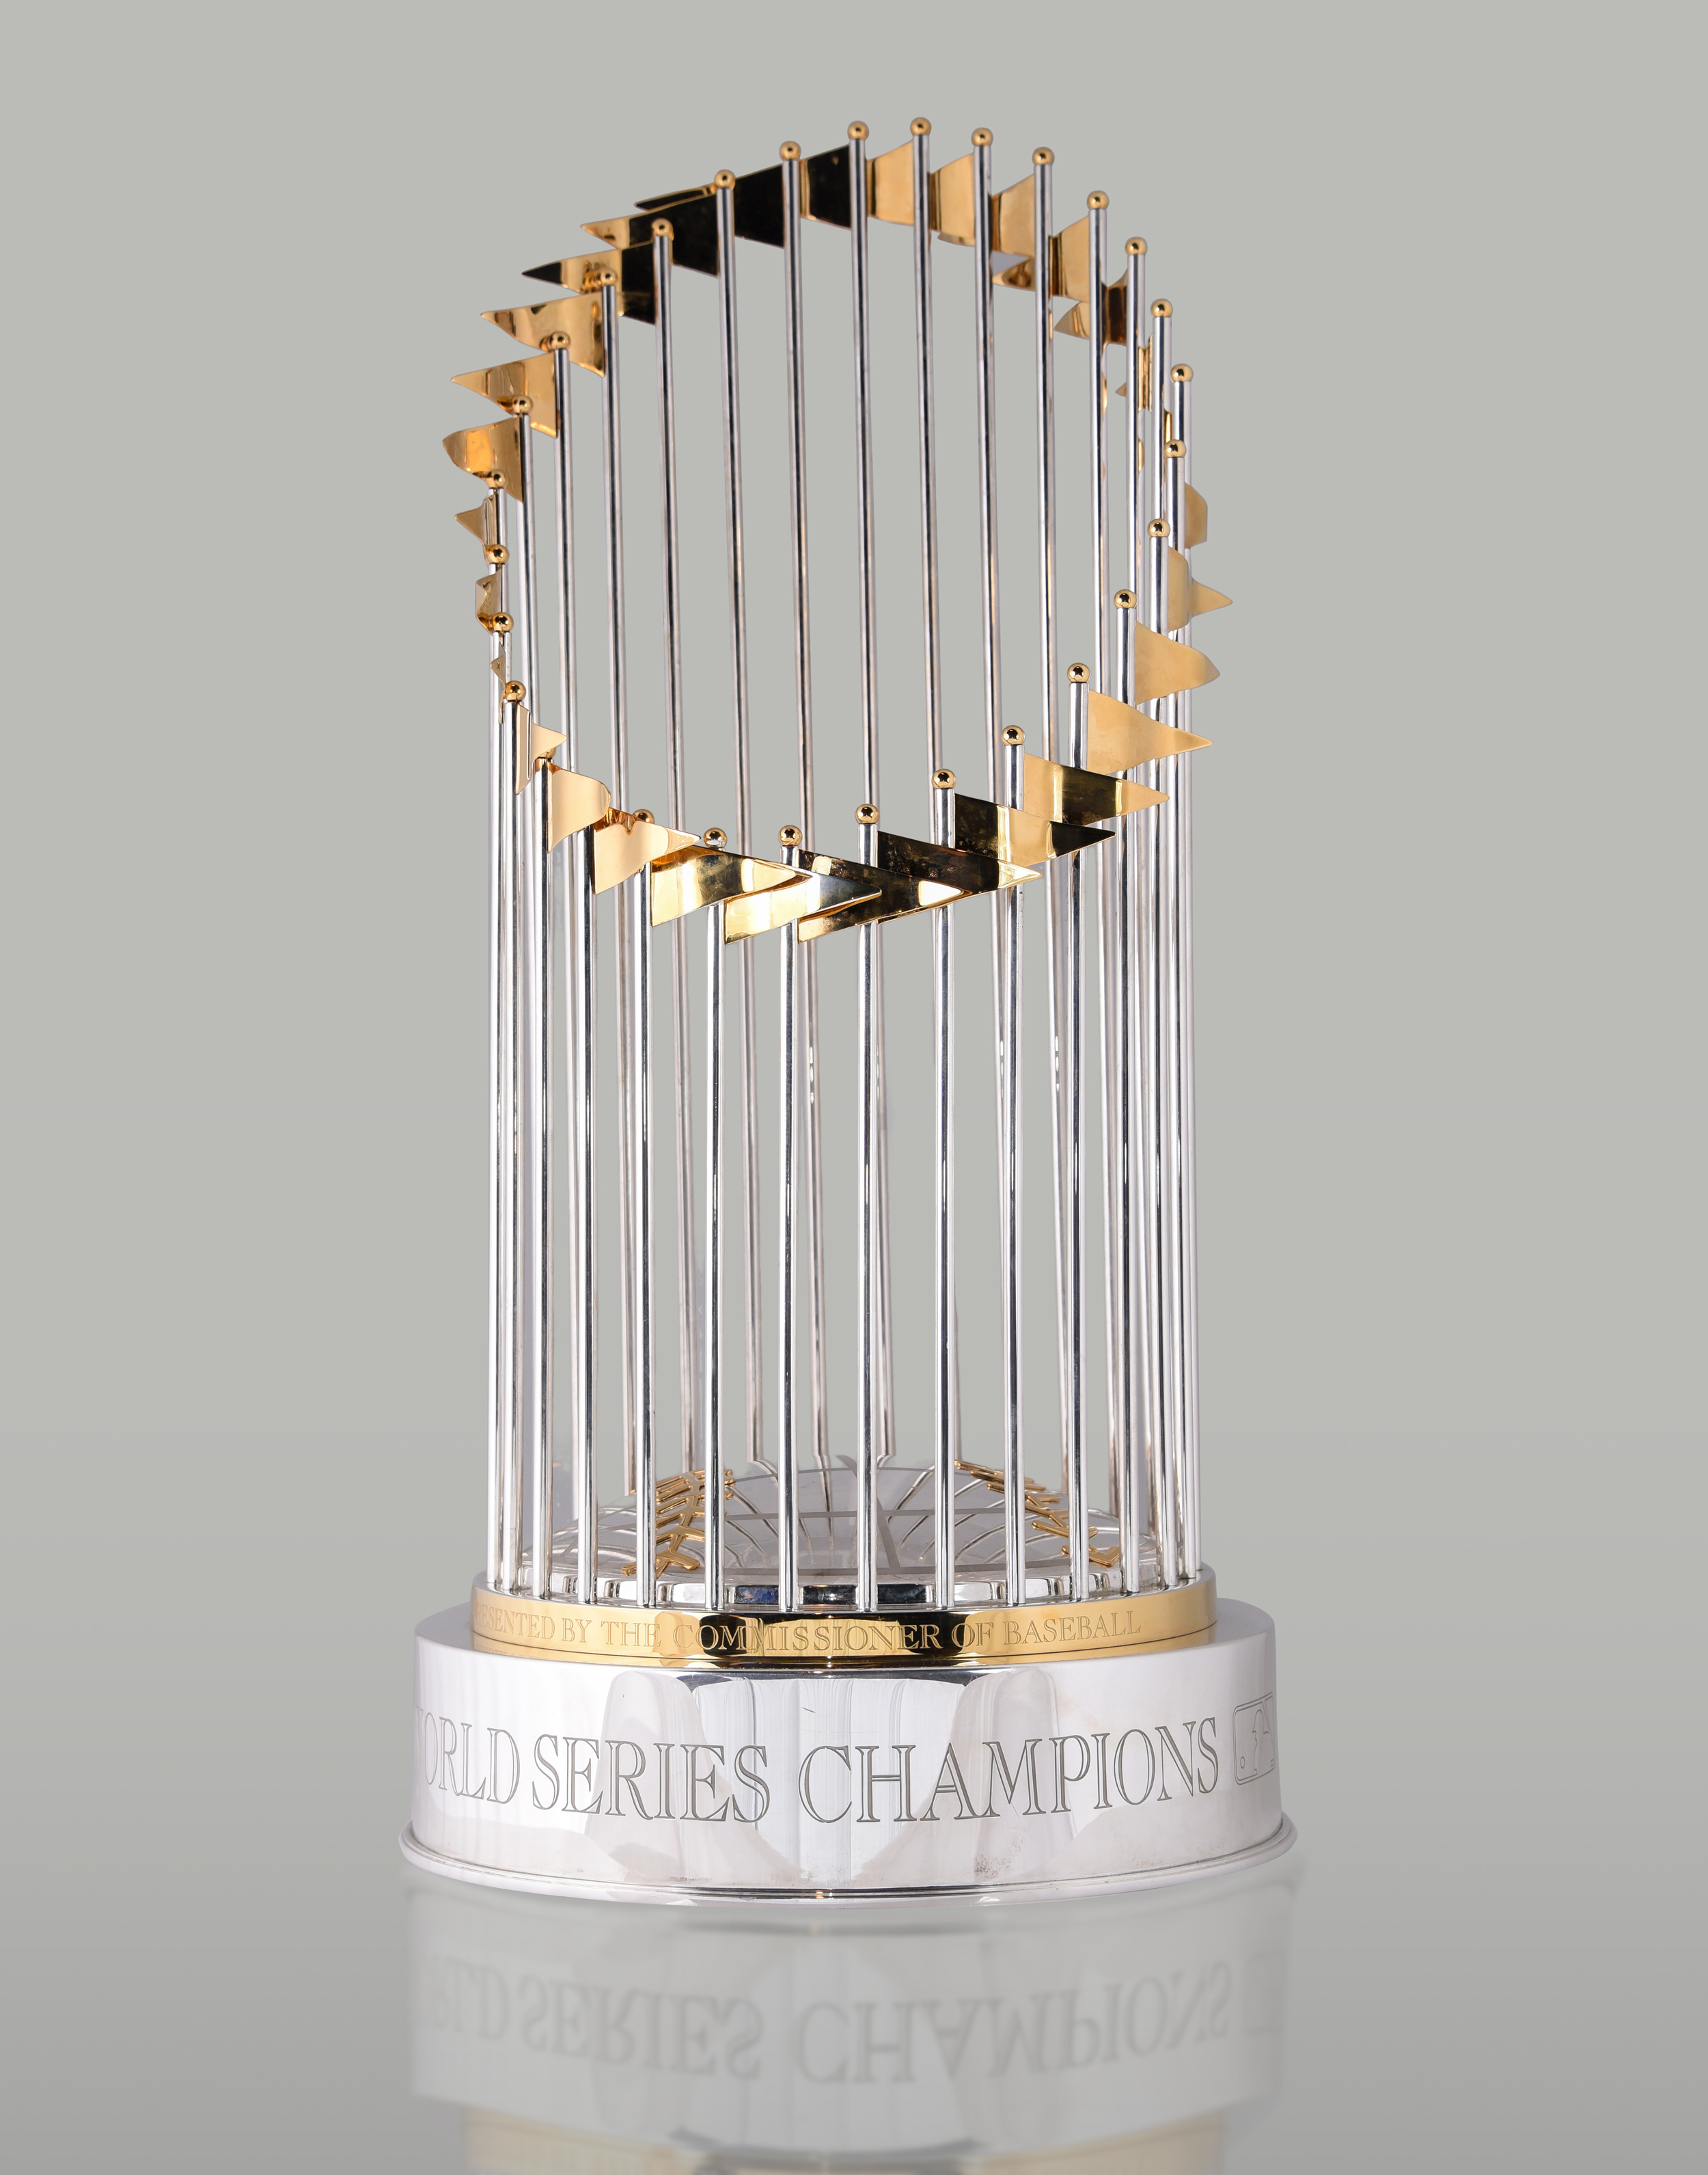 Cardinals' World Series trophy stopping in Springfield on Wednesday